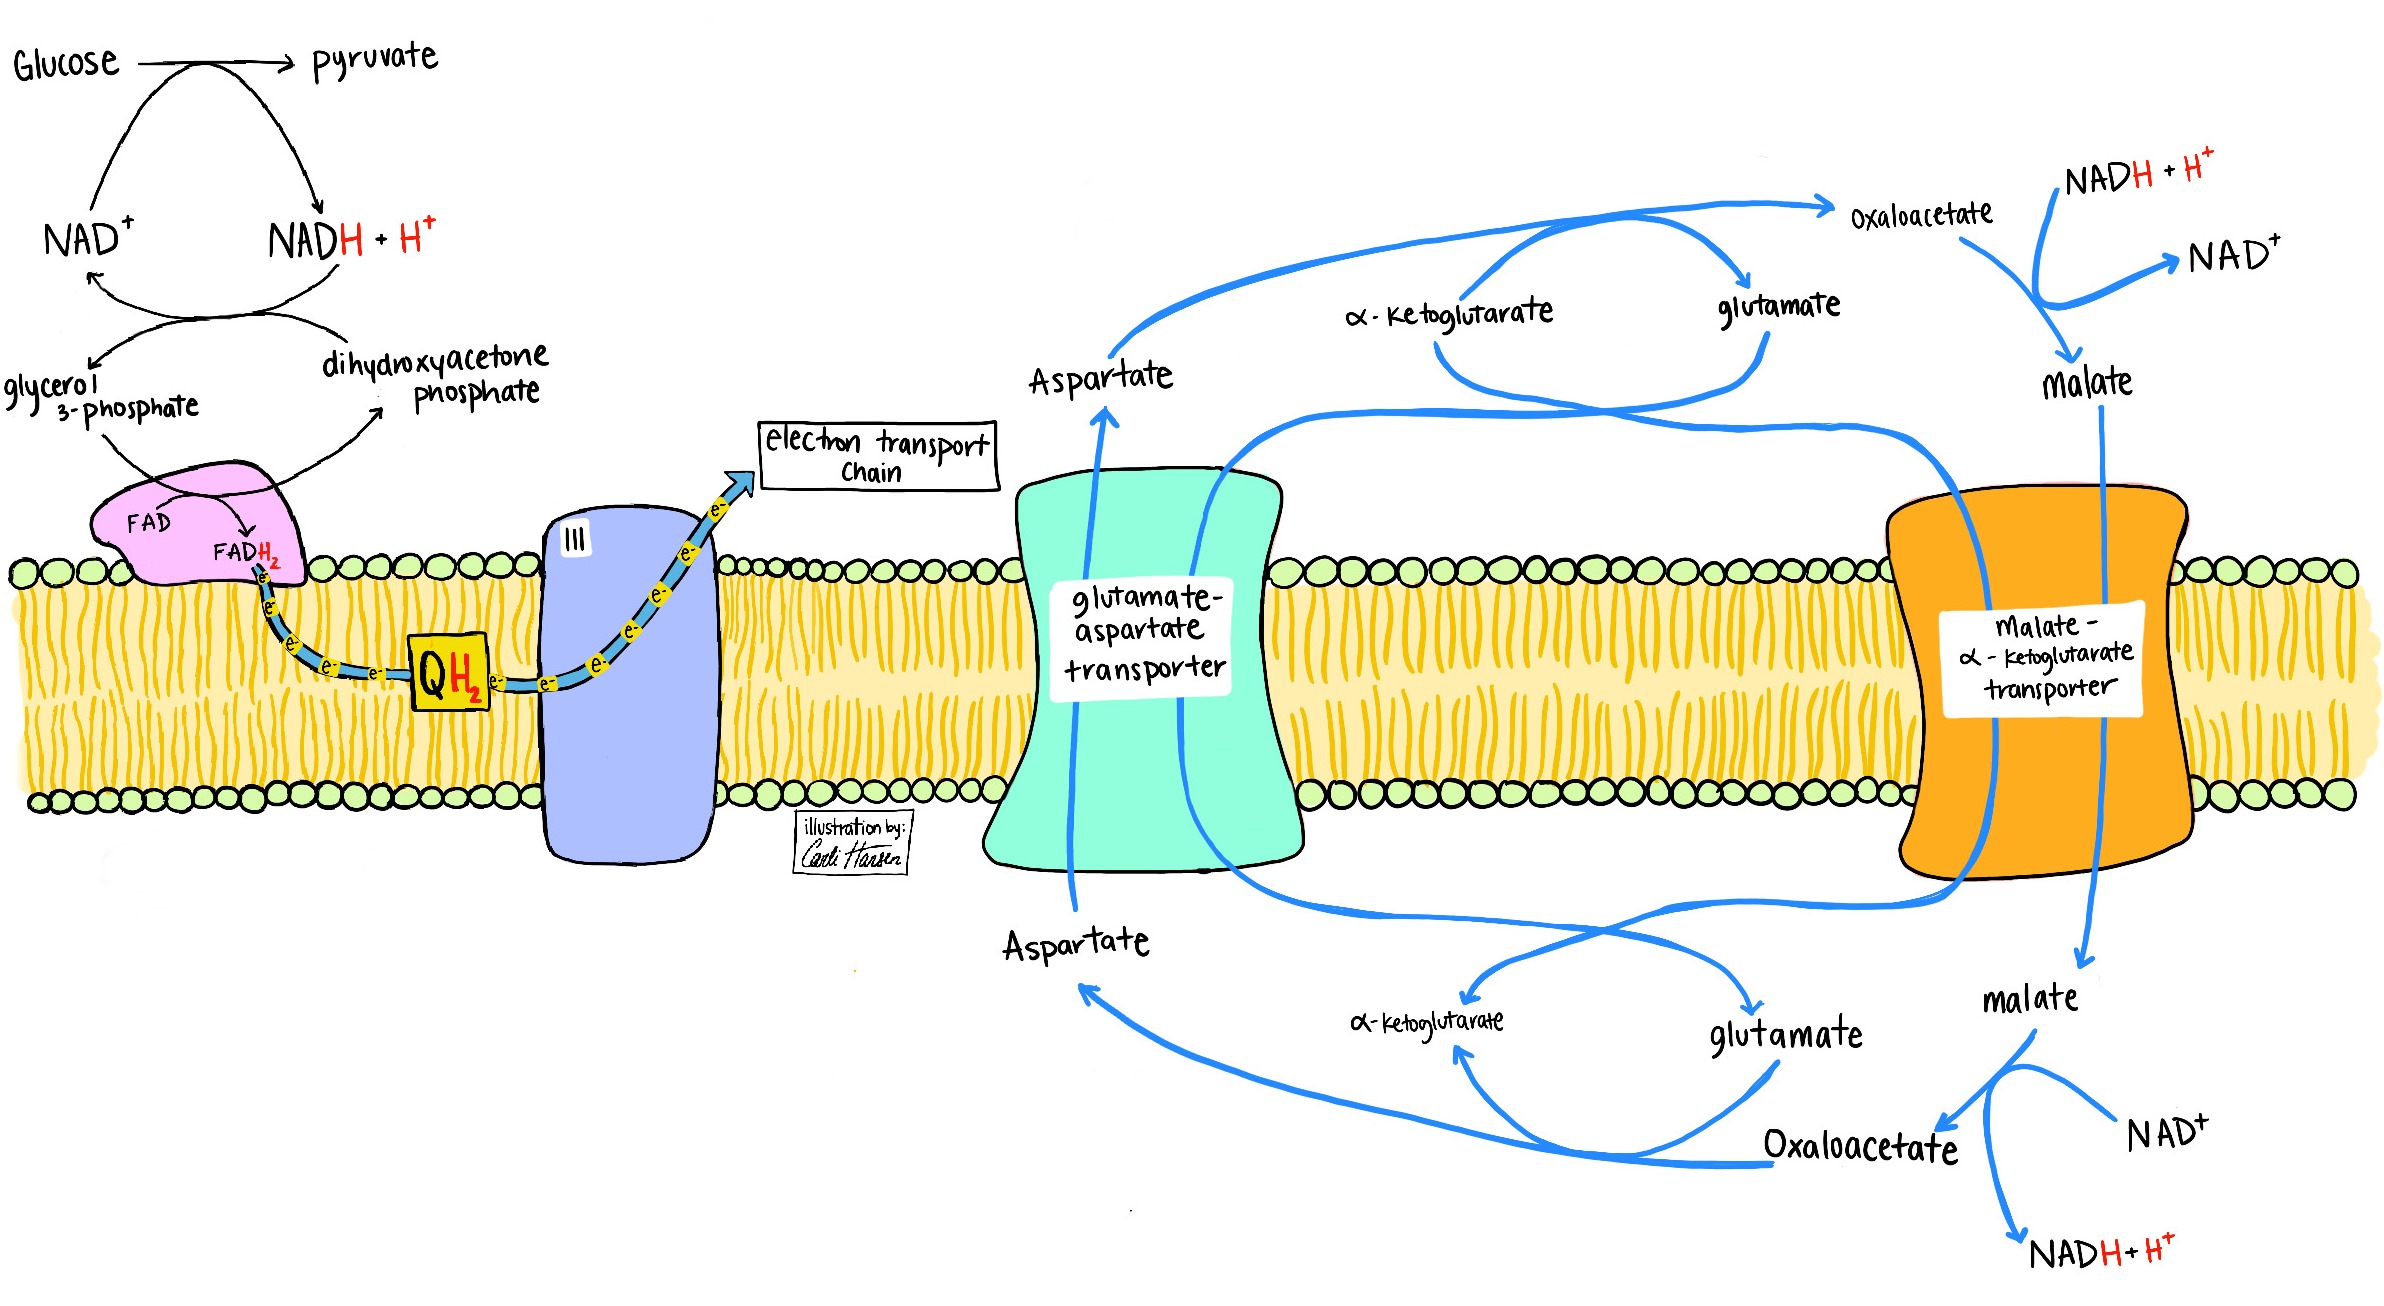 Illustration of multiple shuttle systems that can move reducing equivalents from the cytoplasm to the mitochondria, with various labeled components and reactions